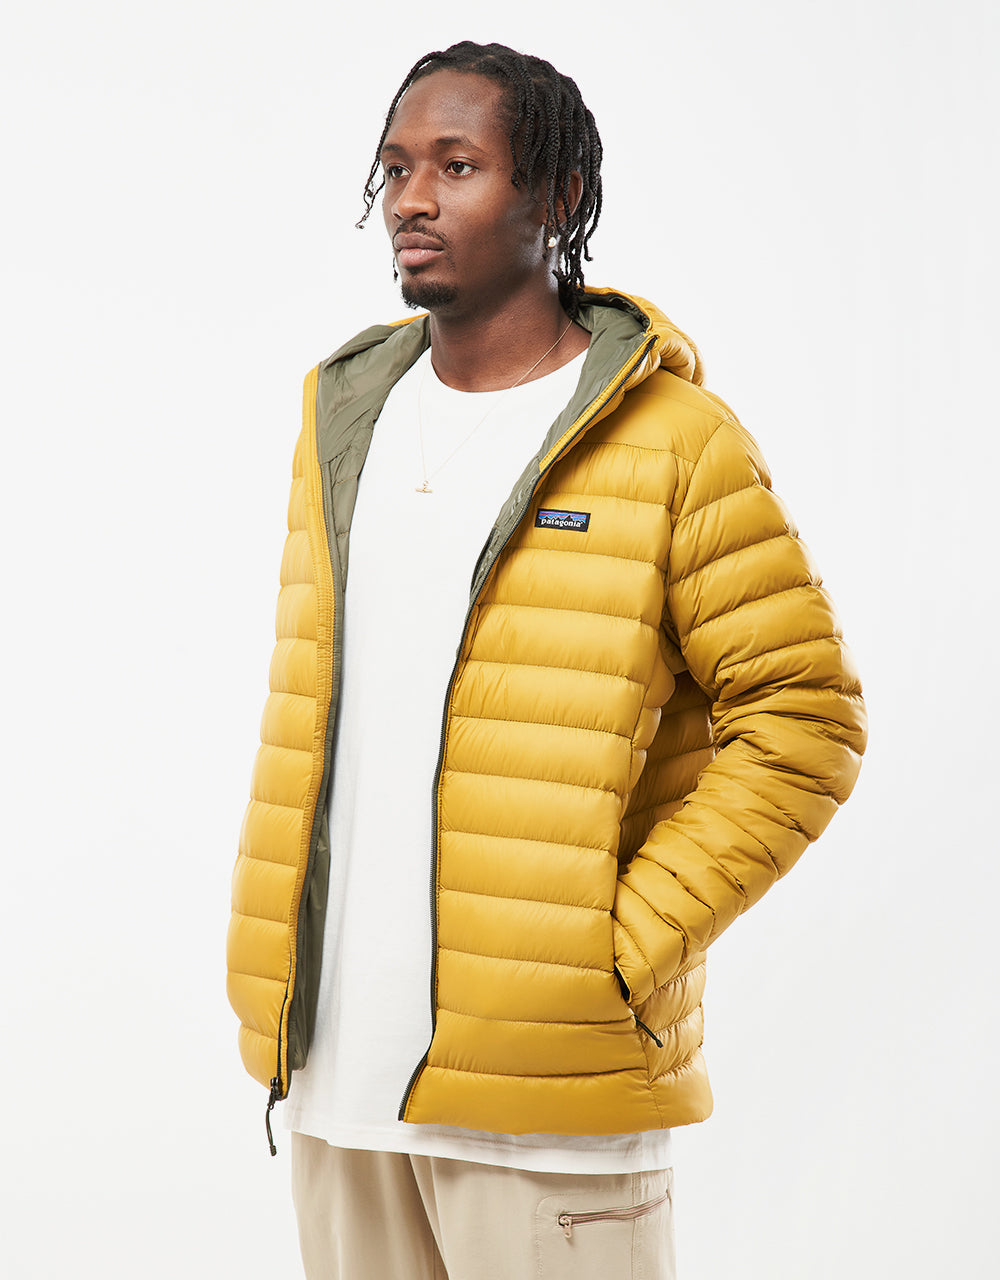 Patagonia Down Sweater Hoody - Cabin Gold